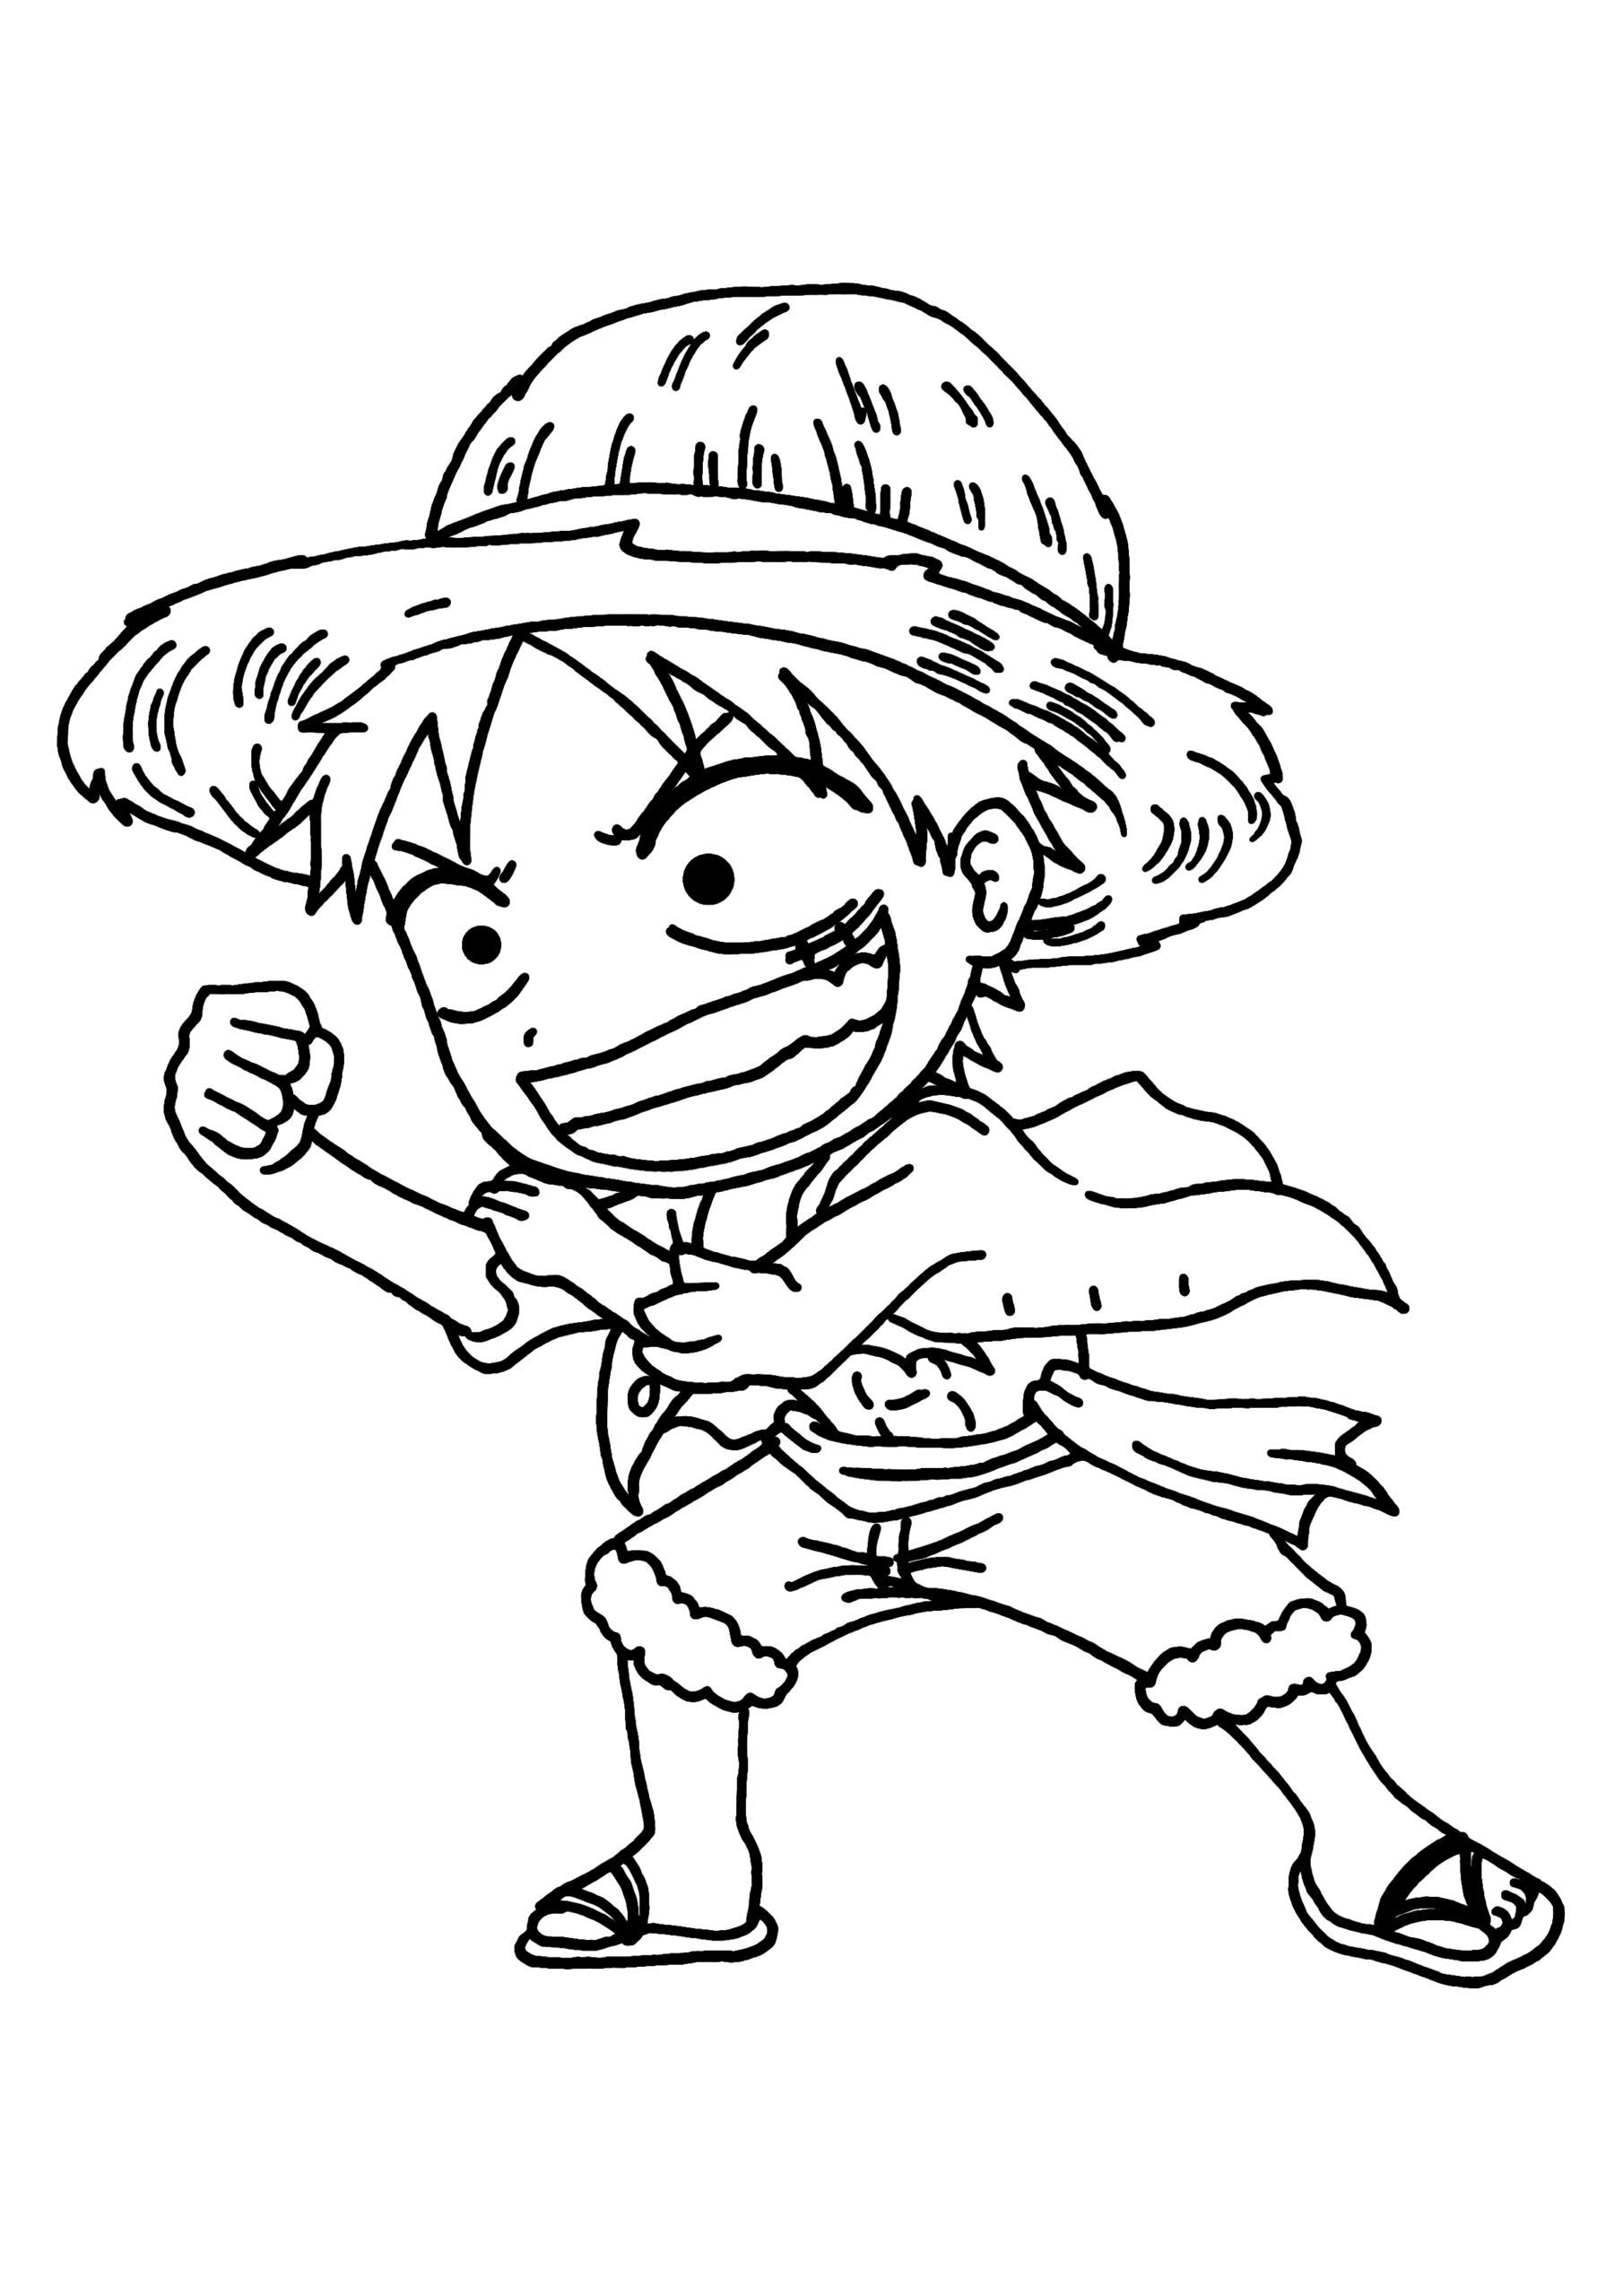 Coloriage204: Coloriage One Piece Luffy tout Coloriage Luffy Gear 4